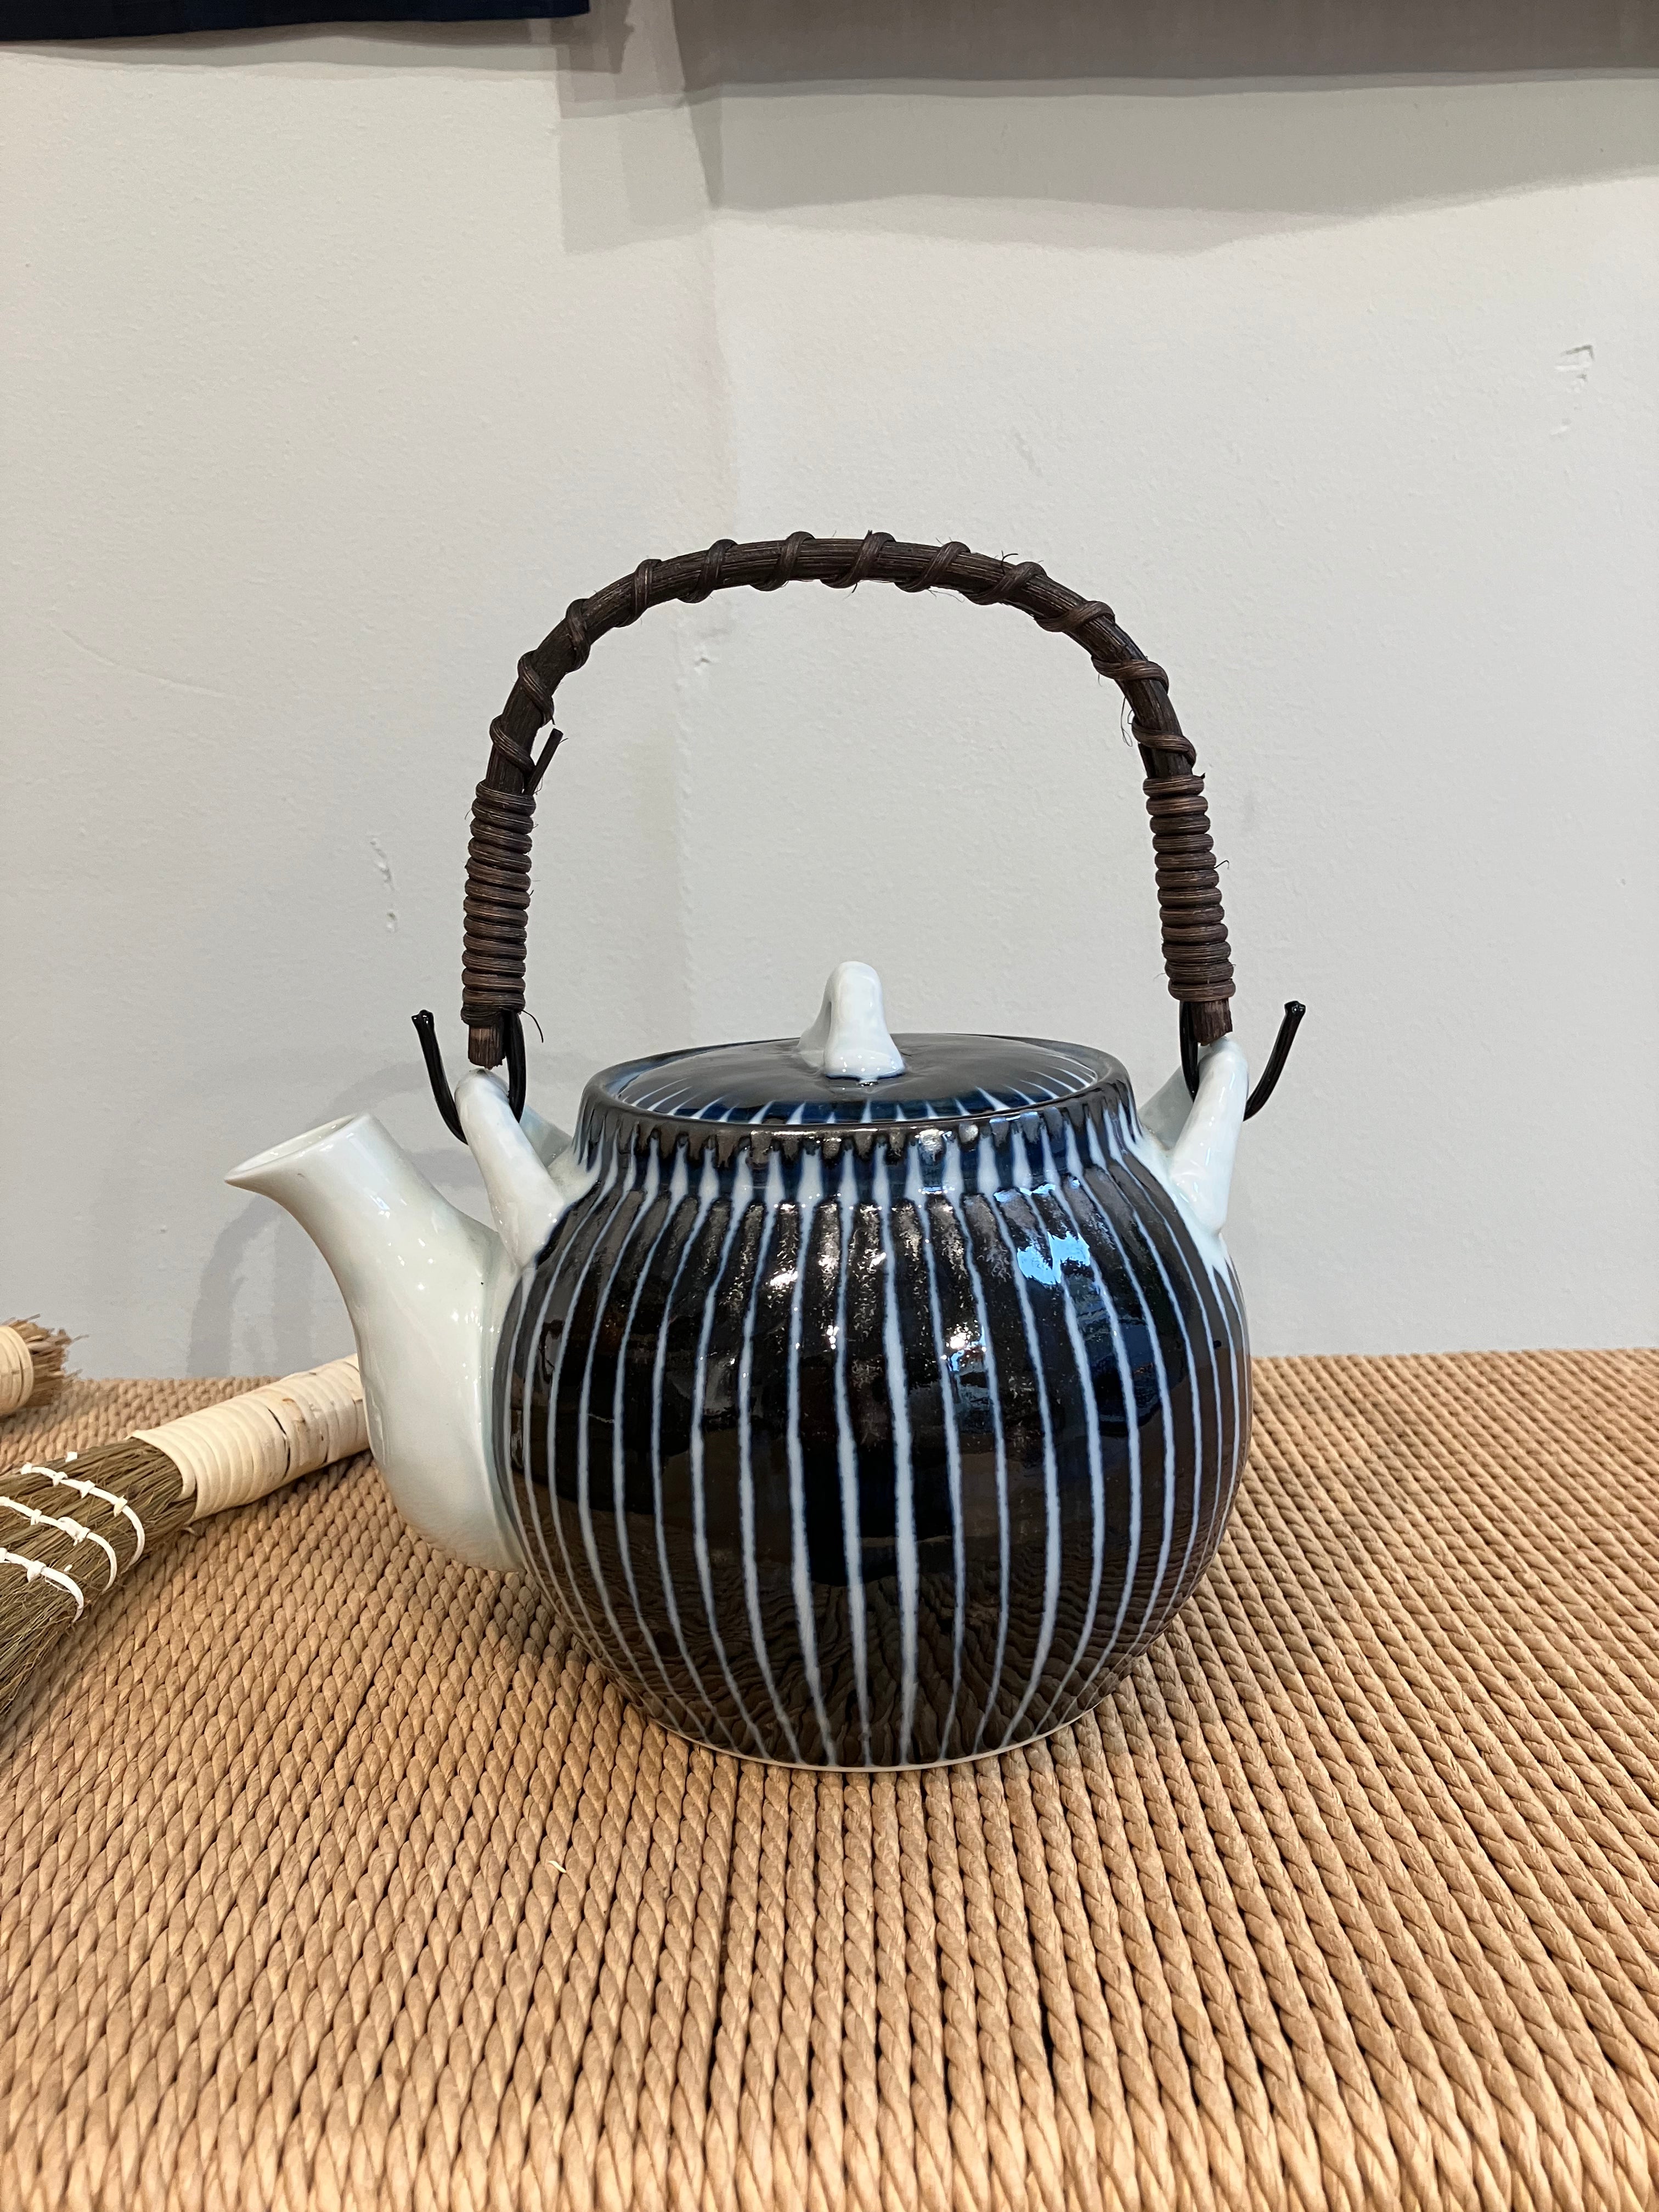 Ceramic teapot with blue stripes and handle